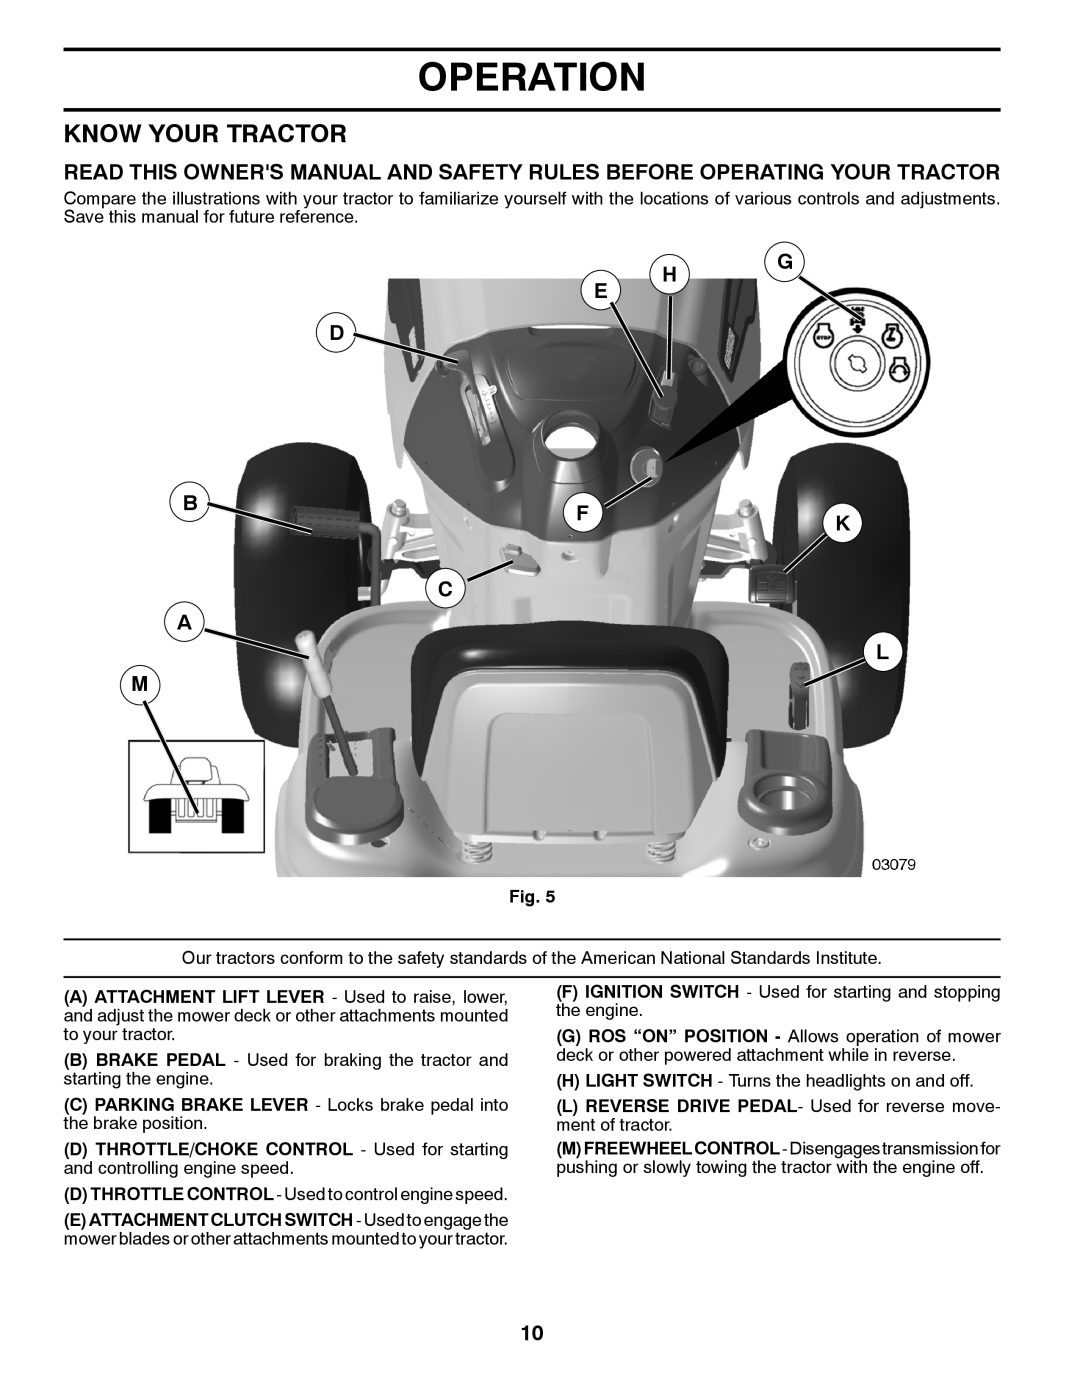 Jonsered LT2218A manual Know Your Tractor, B F K C A L M, Operation 